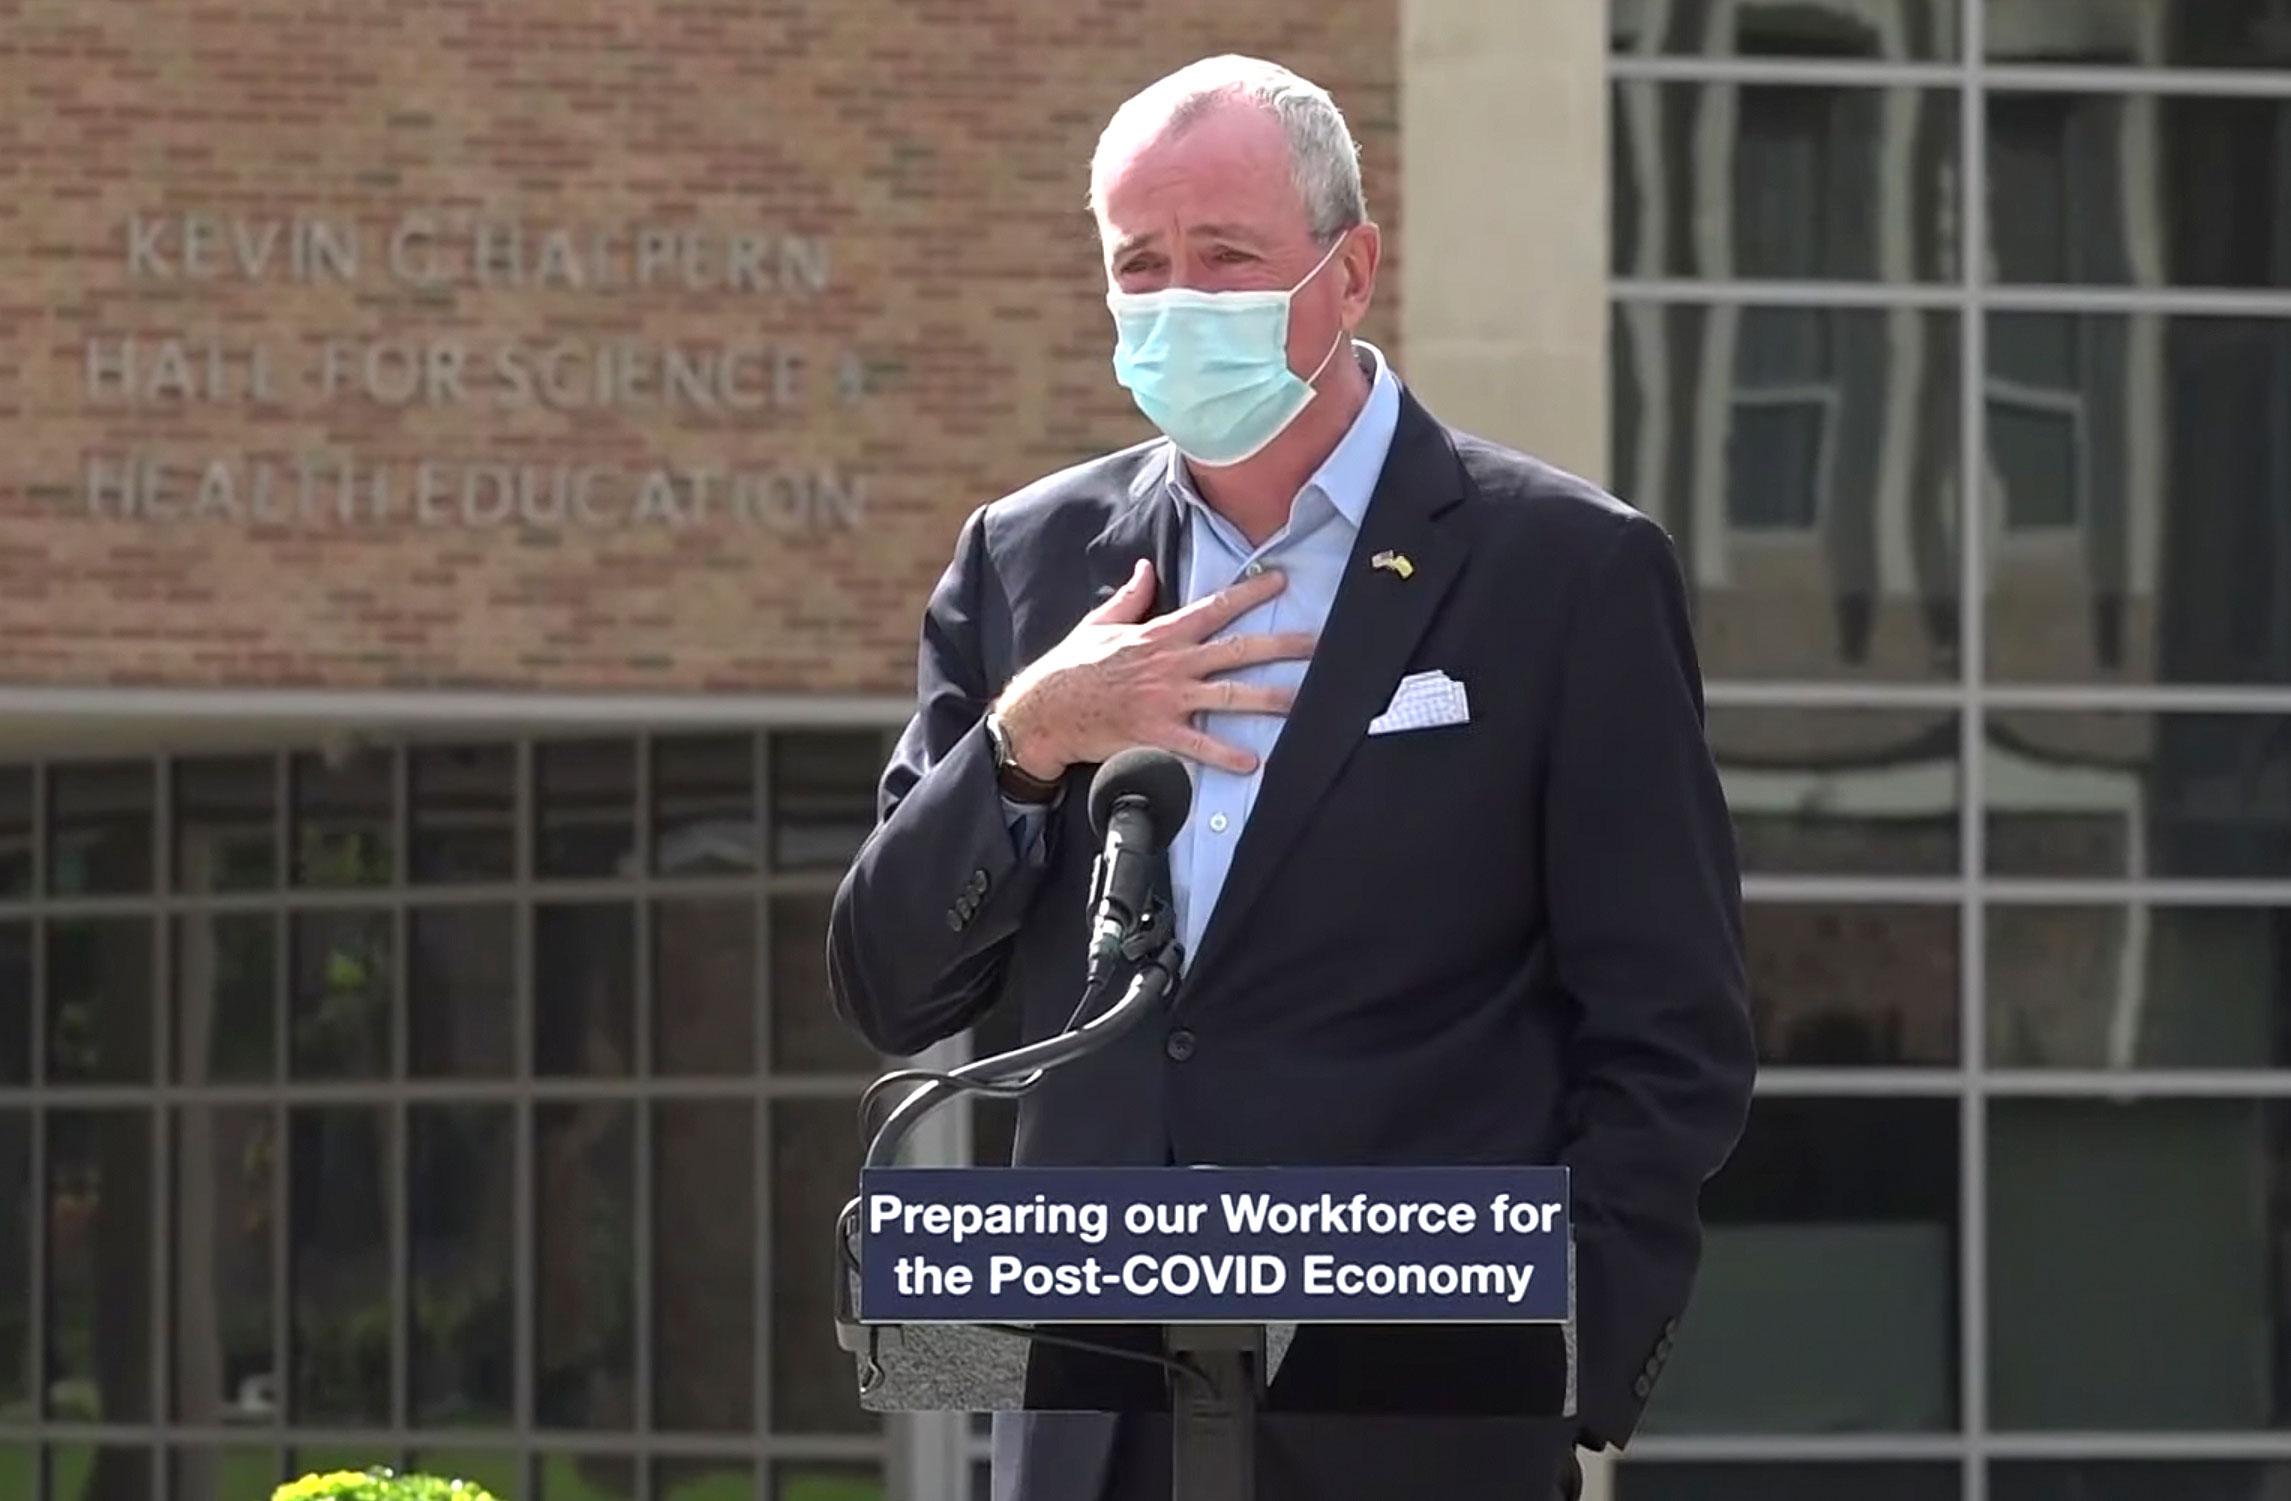 Gov. Phil Murphy speaks at an event on October 21 in Blackwood, New Jersey. He told attendees that he must leave the event after just finding out that he'd been in contact with someone who had tested positive for Covid-19.